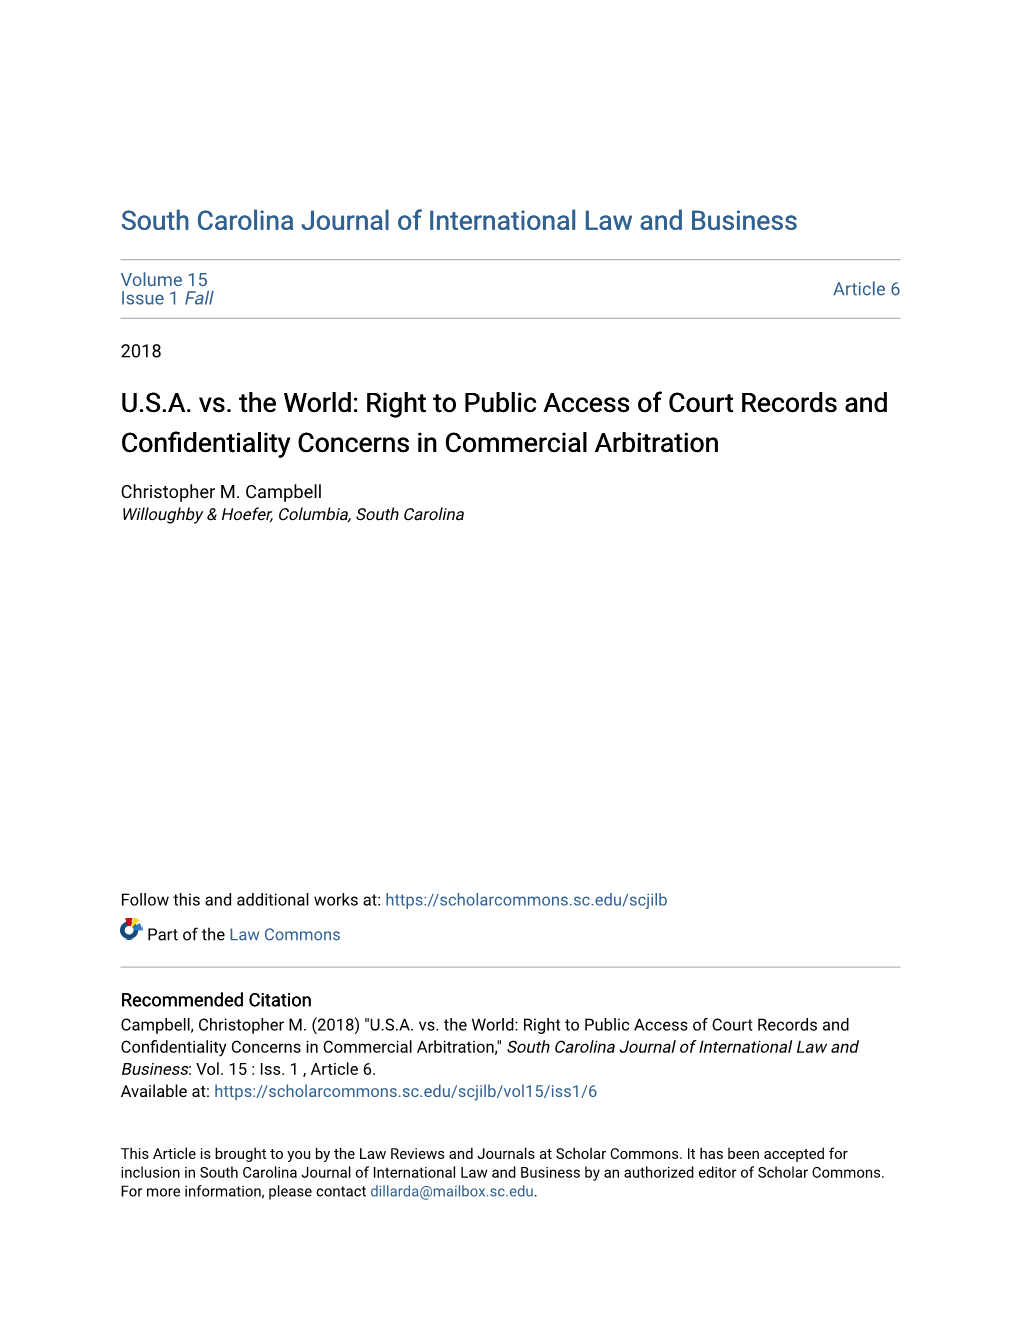 U.S.A. Vs. the World: Right to Public Access of Court Records and Confidentiality Concerns in Commercial Arbitration